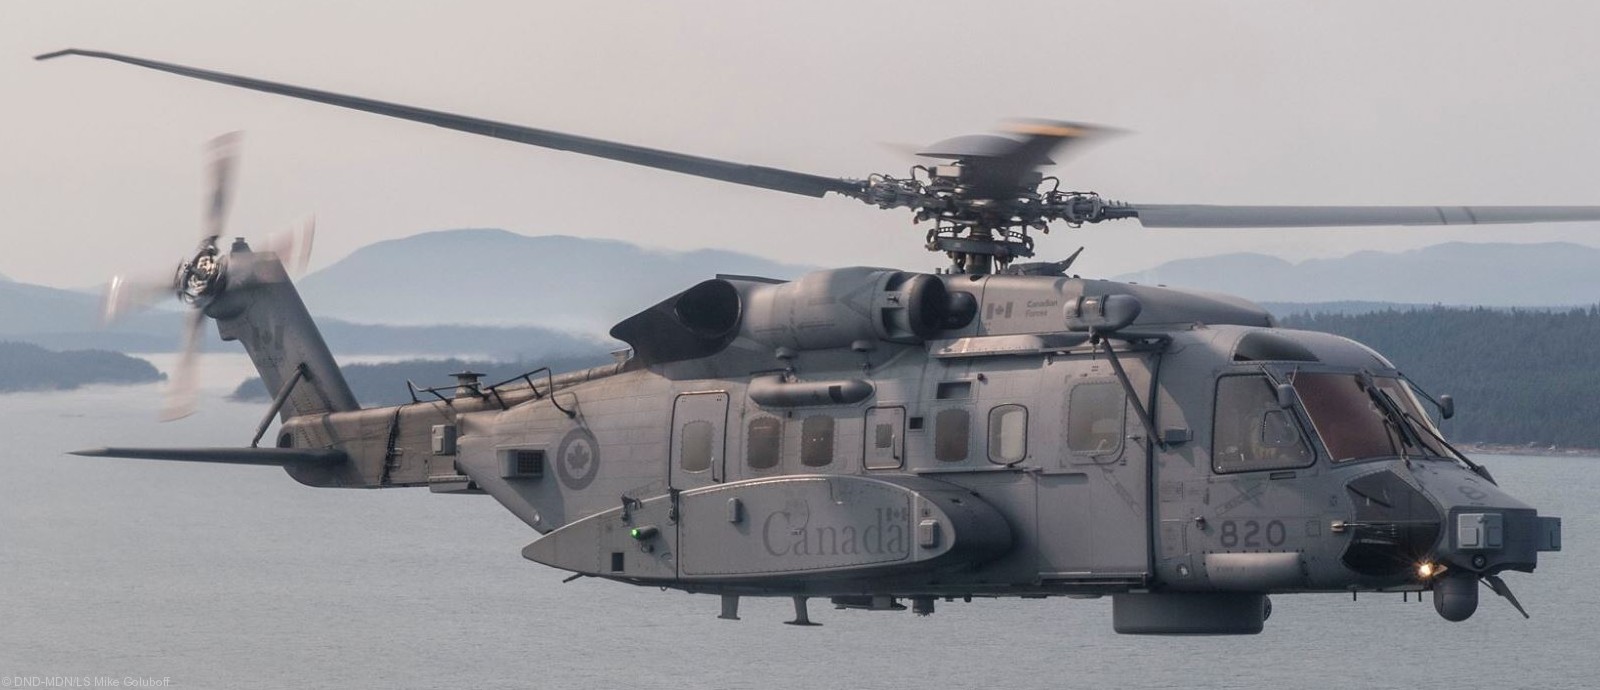 ch-148 cyclone naval helicopter royal canadian air force navy rcaf sikorsky hmcs 406 423 443 maritime squadron 22